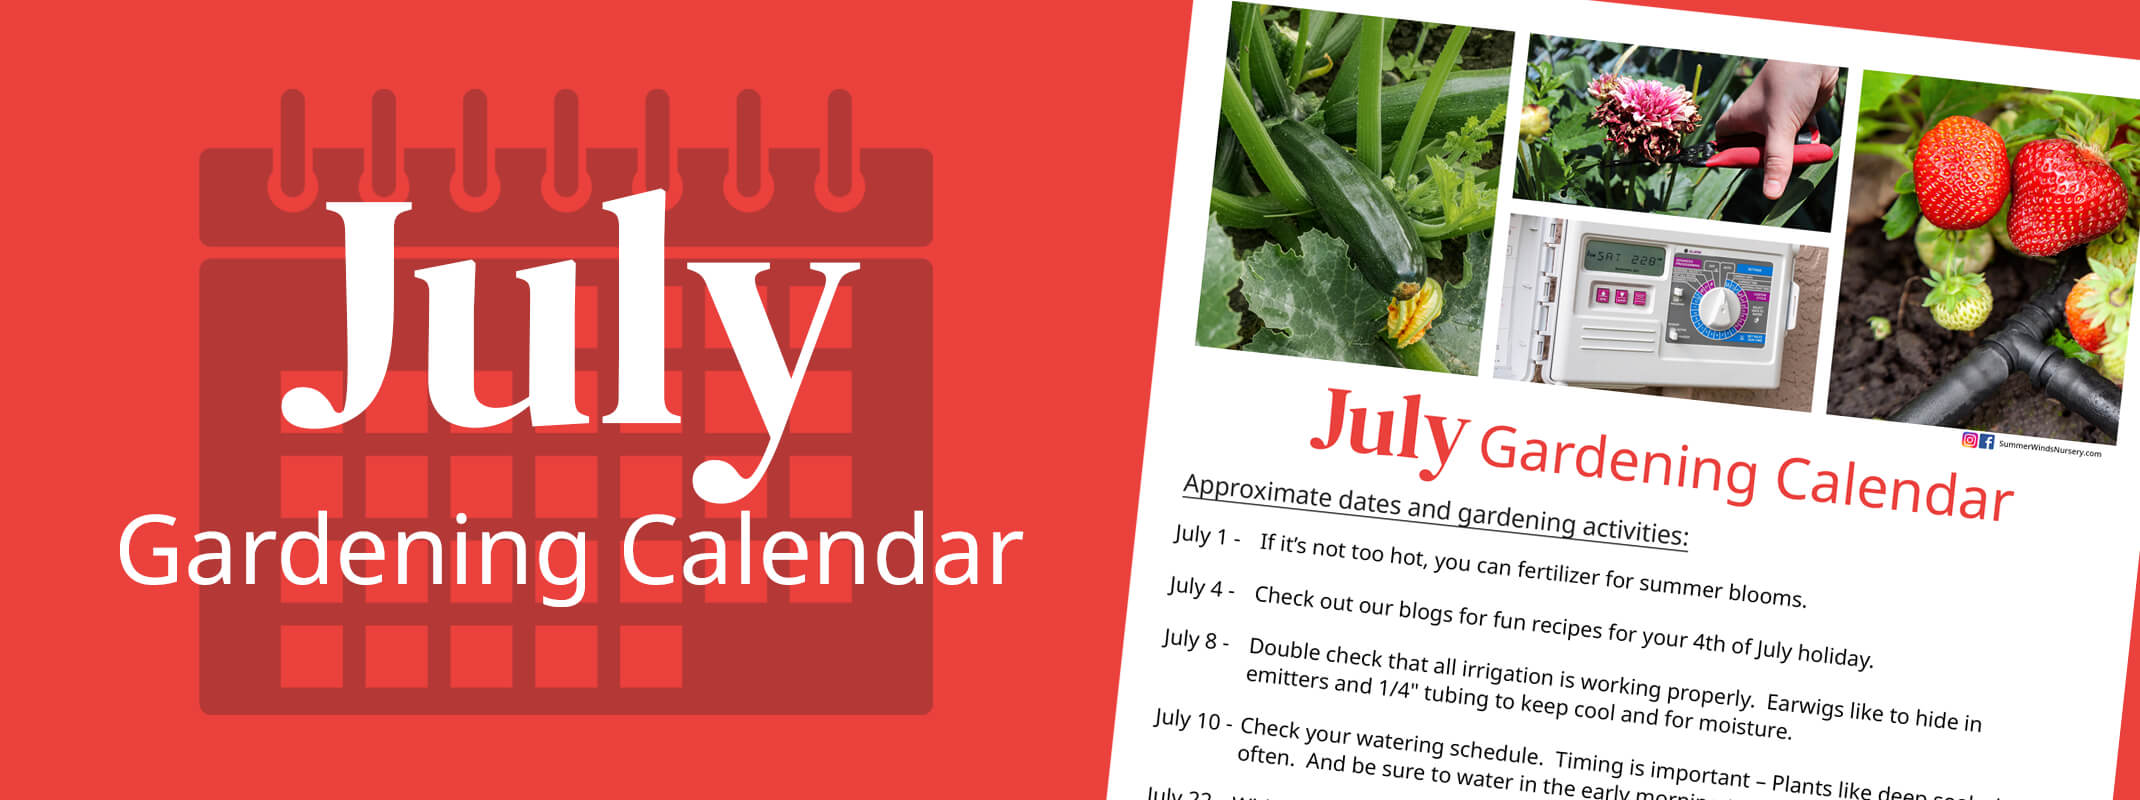 july gardening calendar with tips on the right